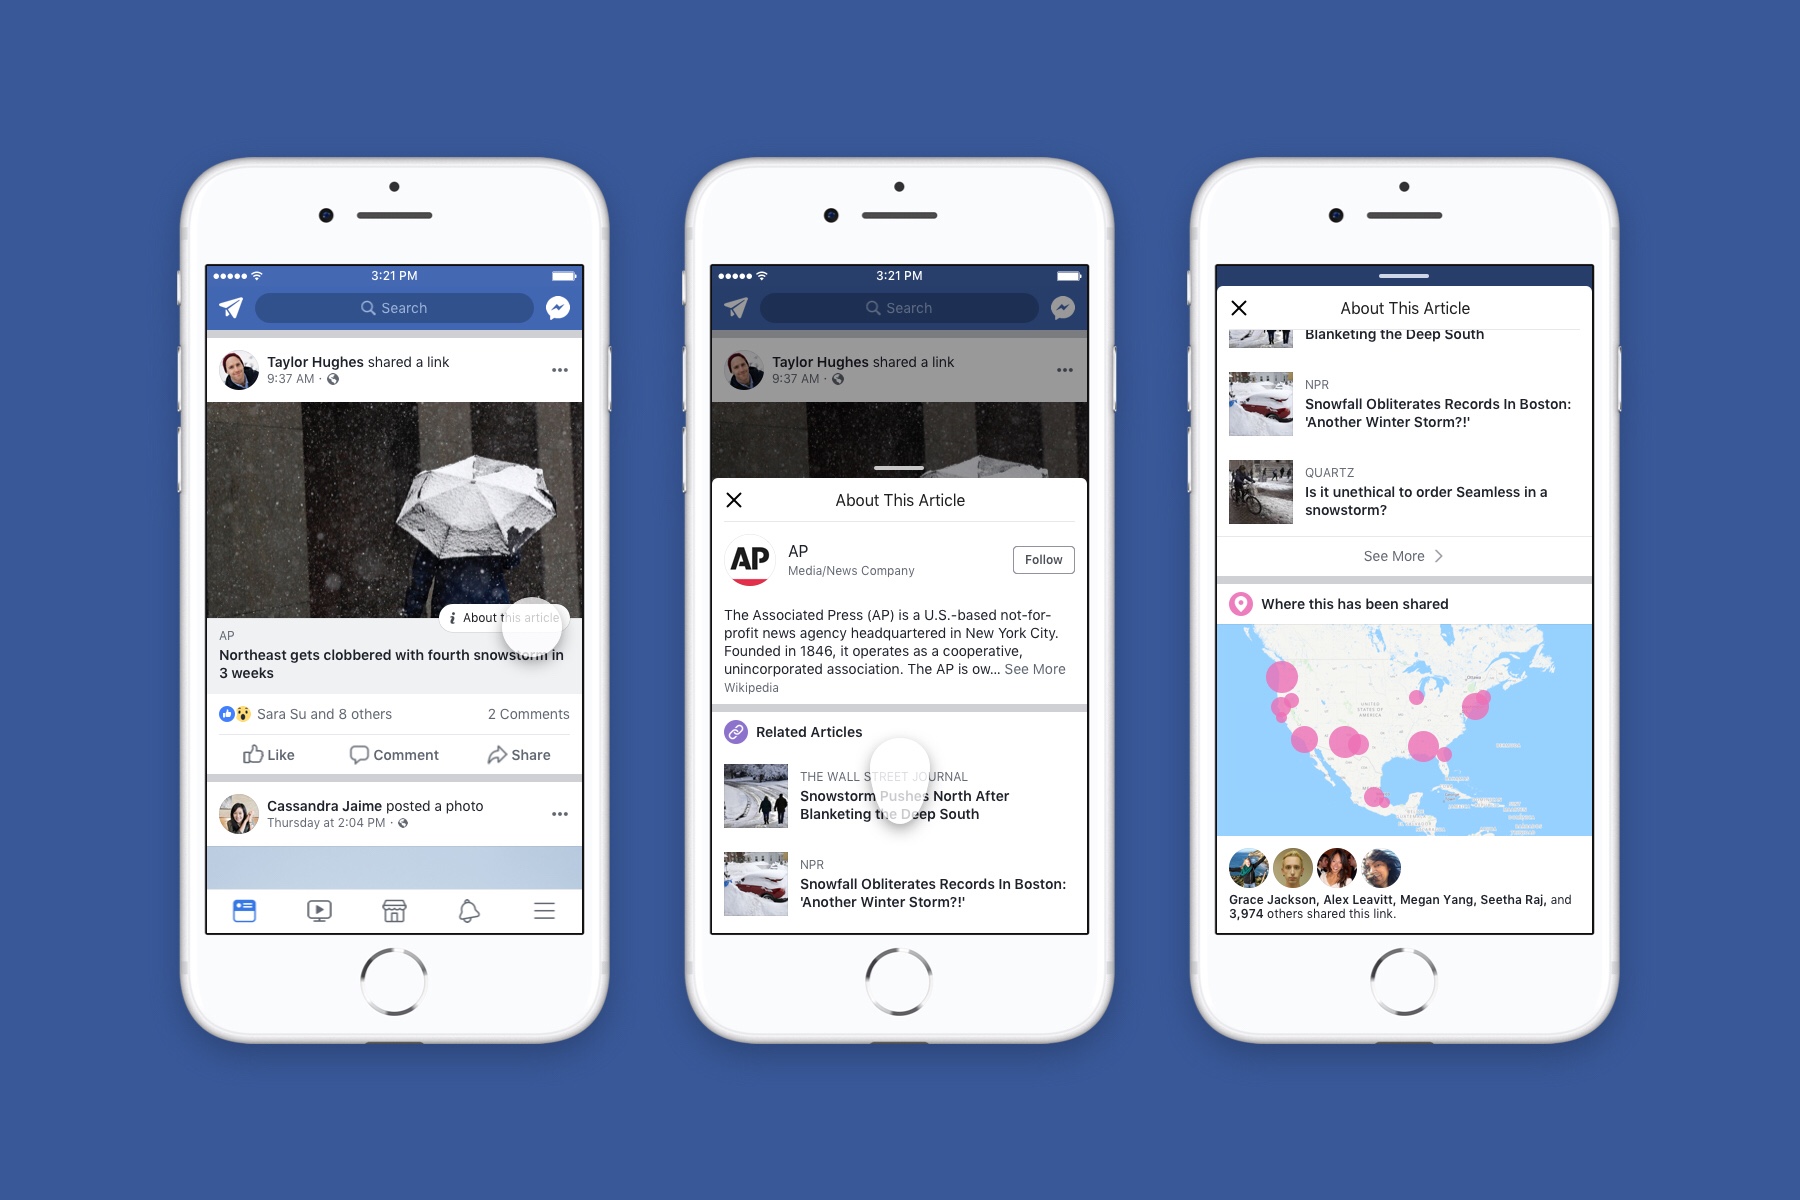 Facebook has rolled out news verification tools for everyone in the US